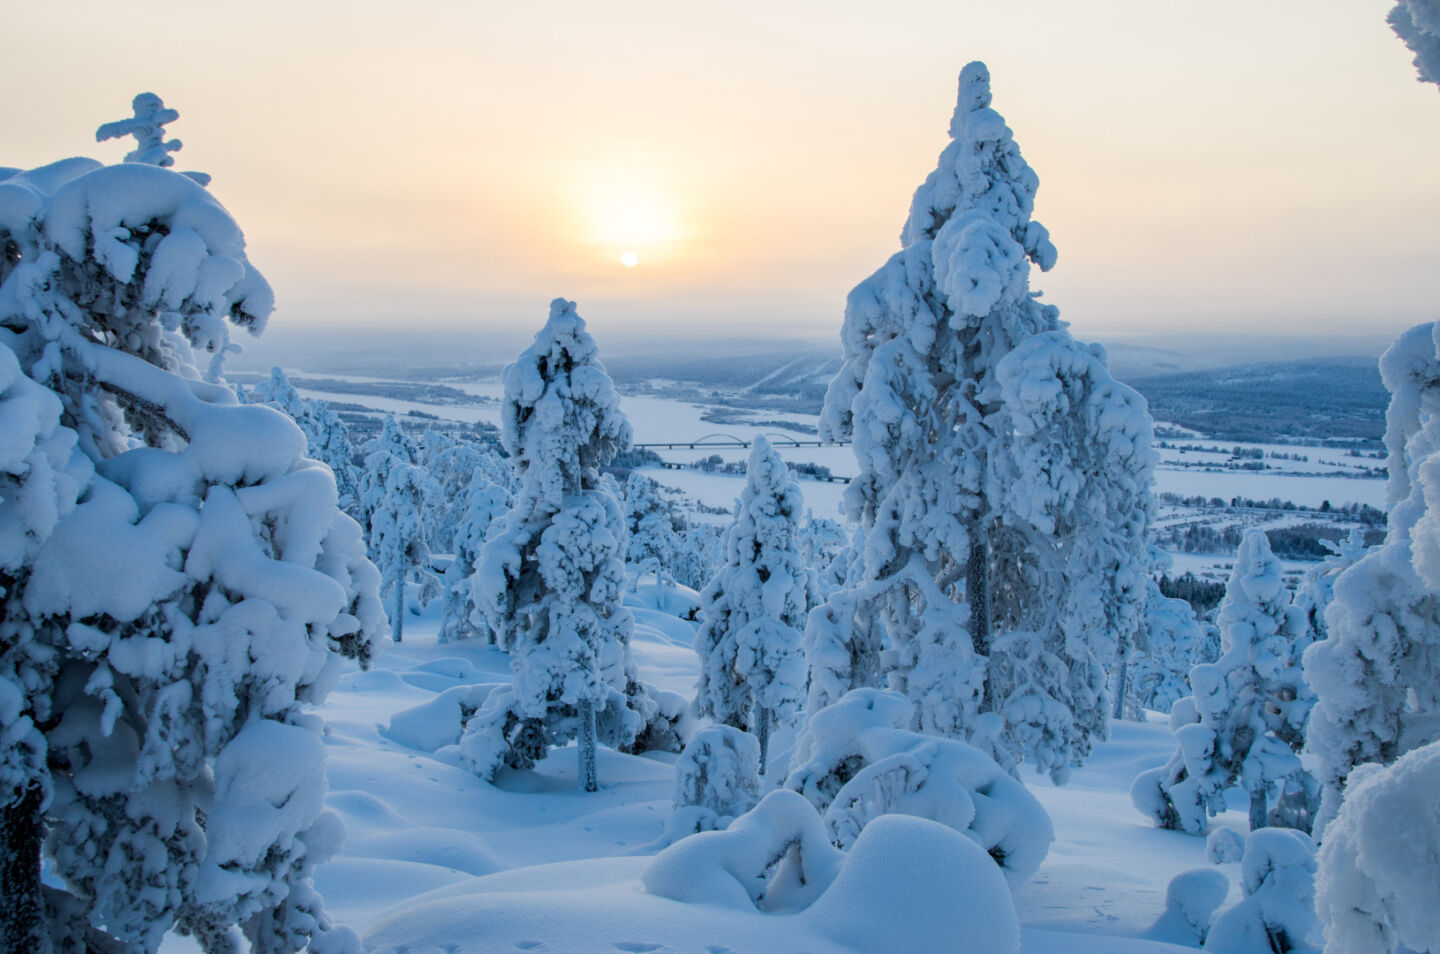 A hazy winter day in Ylitornio, a filming location in Finnish Lapland